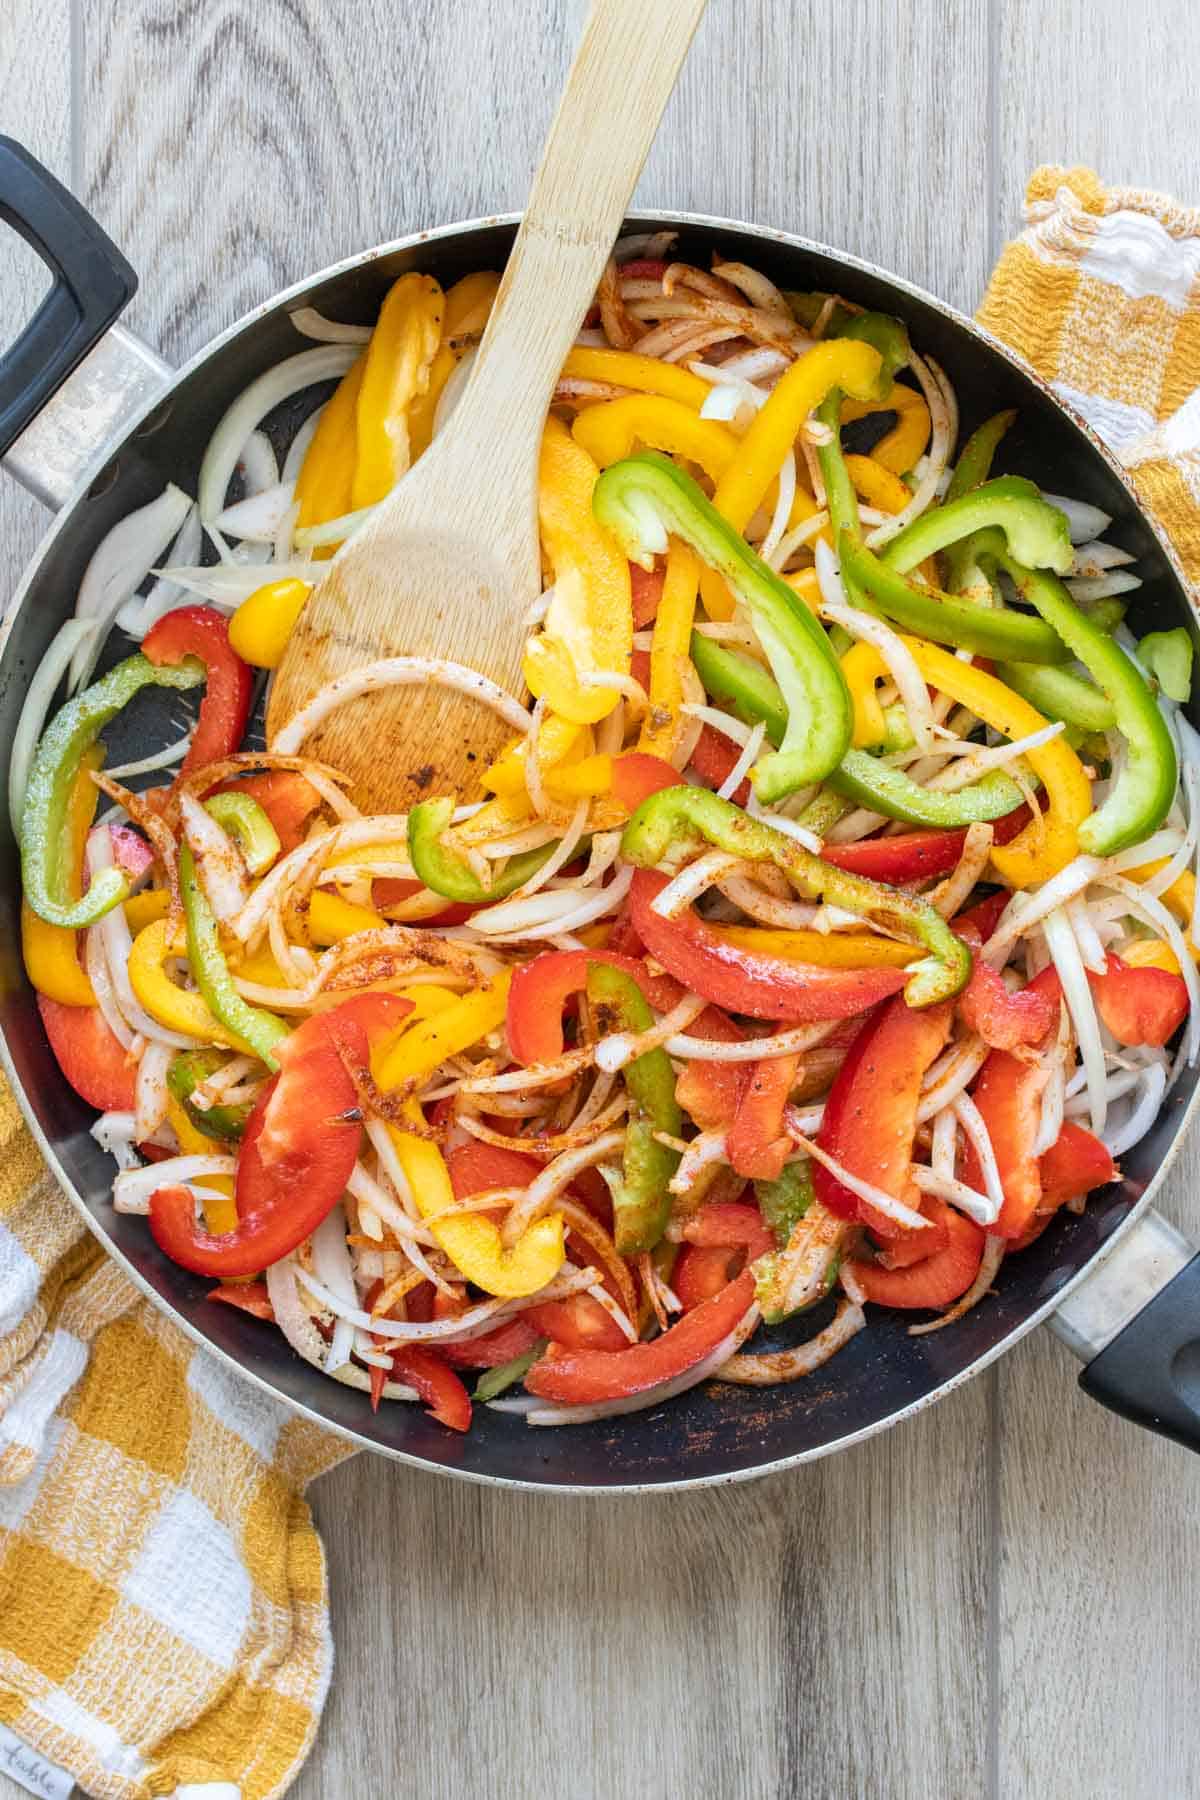 Pan with sliced peppers and onions being mixed with a wooden spoon.